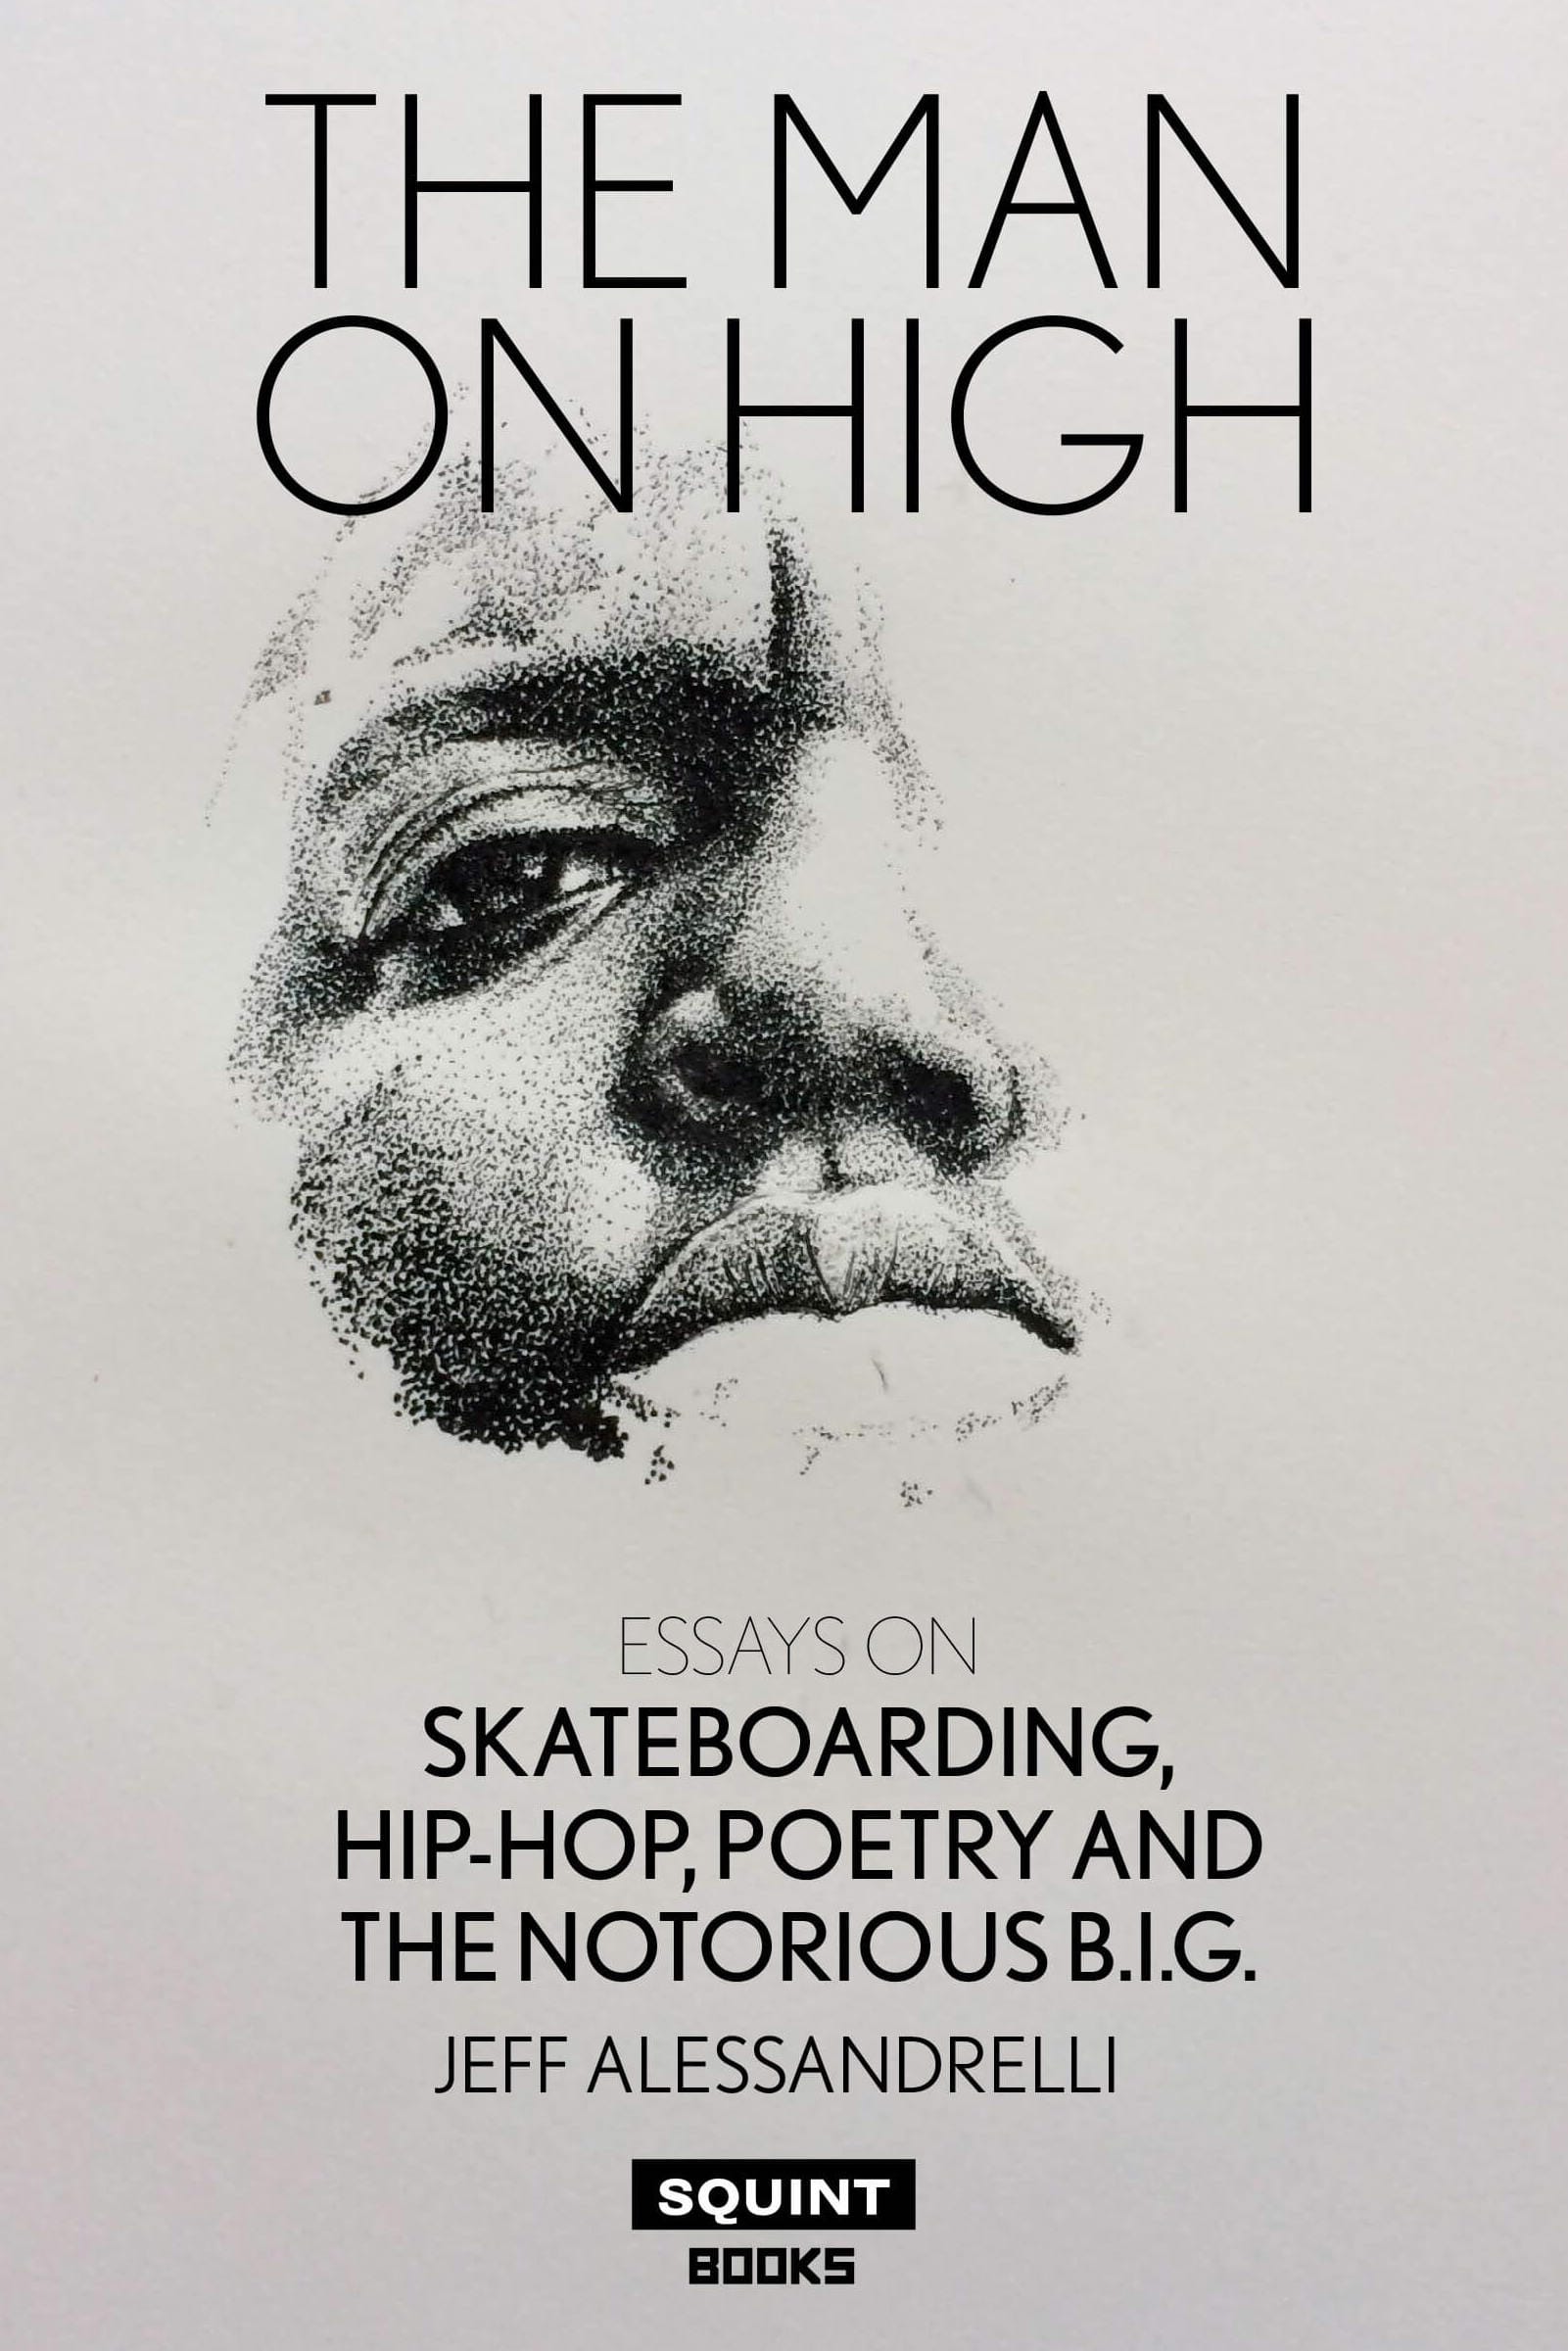 The Man on High: Essays on Skateboarding, Hip-Hop, Poetry and The Notorious B.I.G.